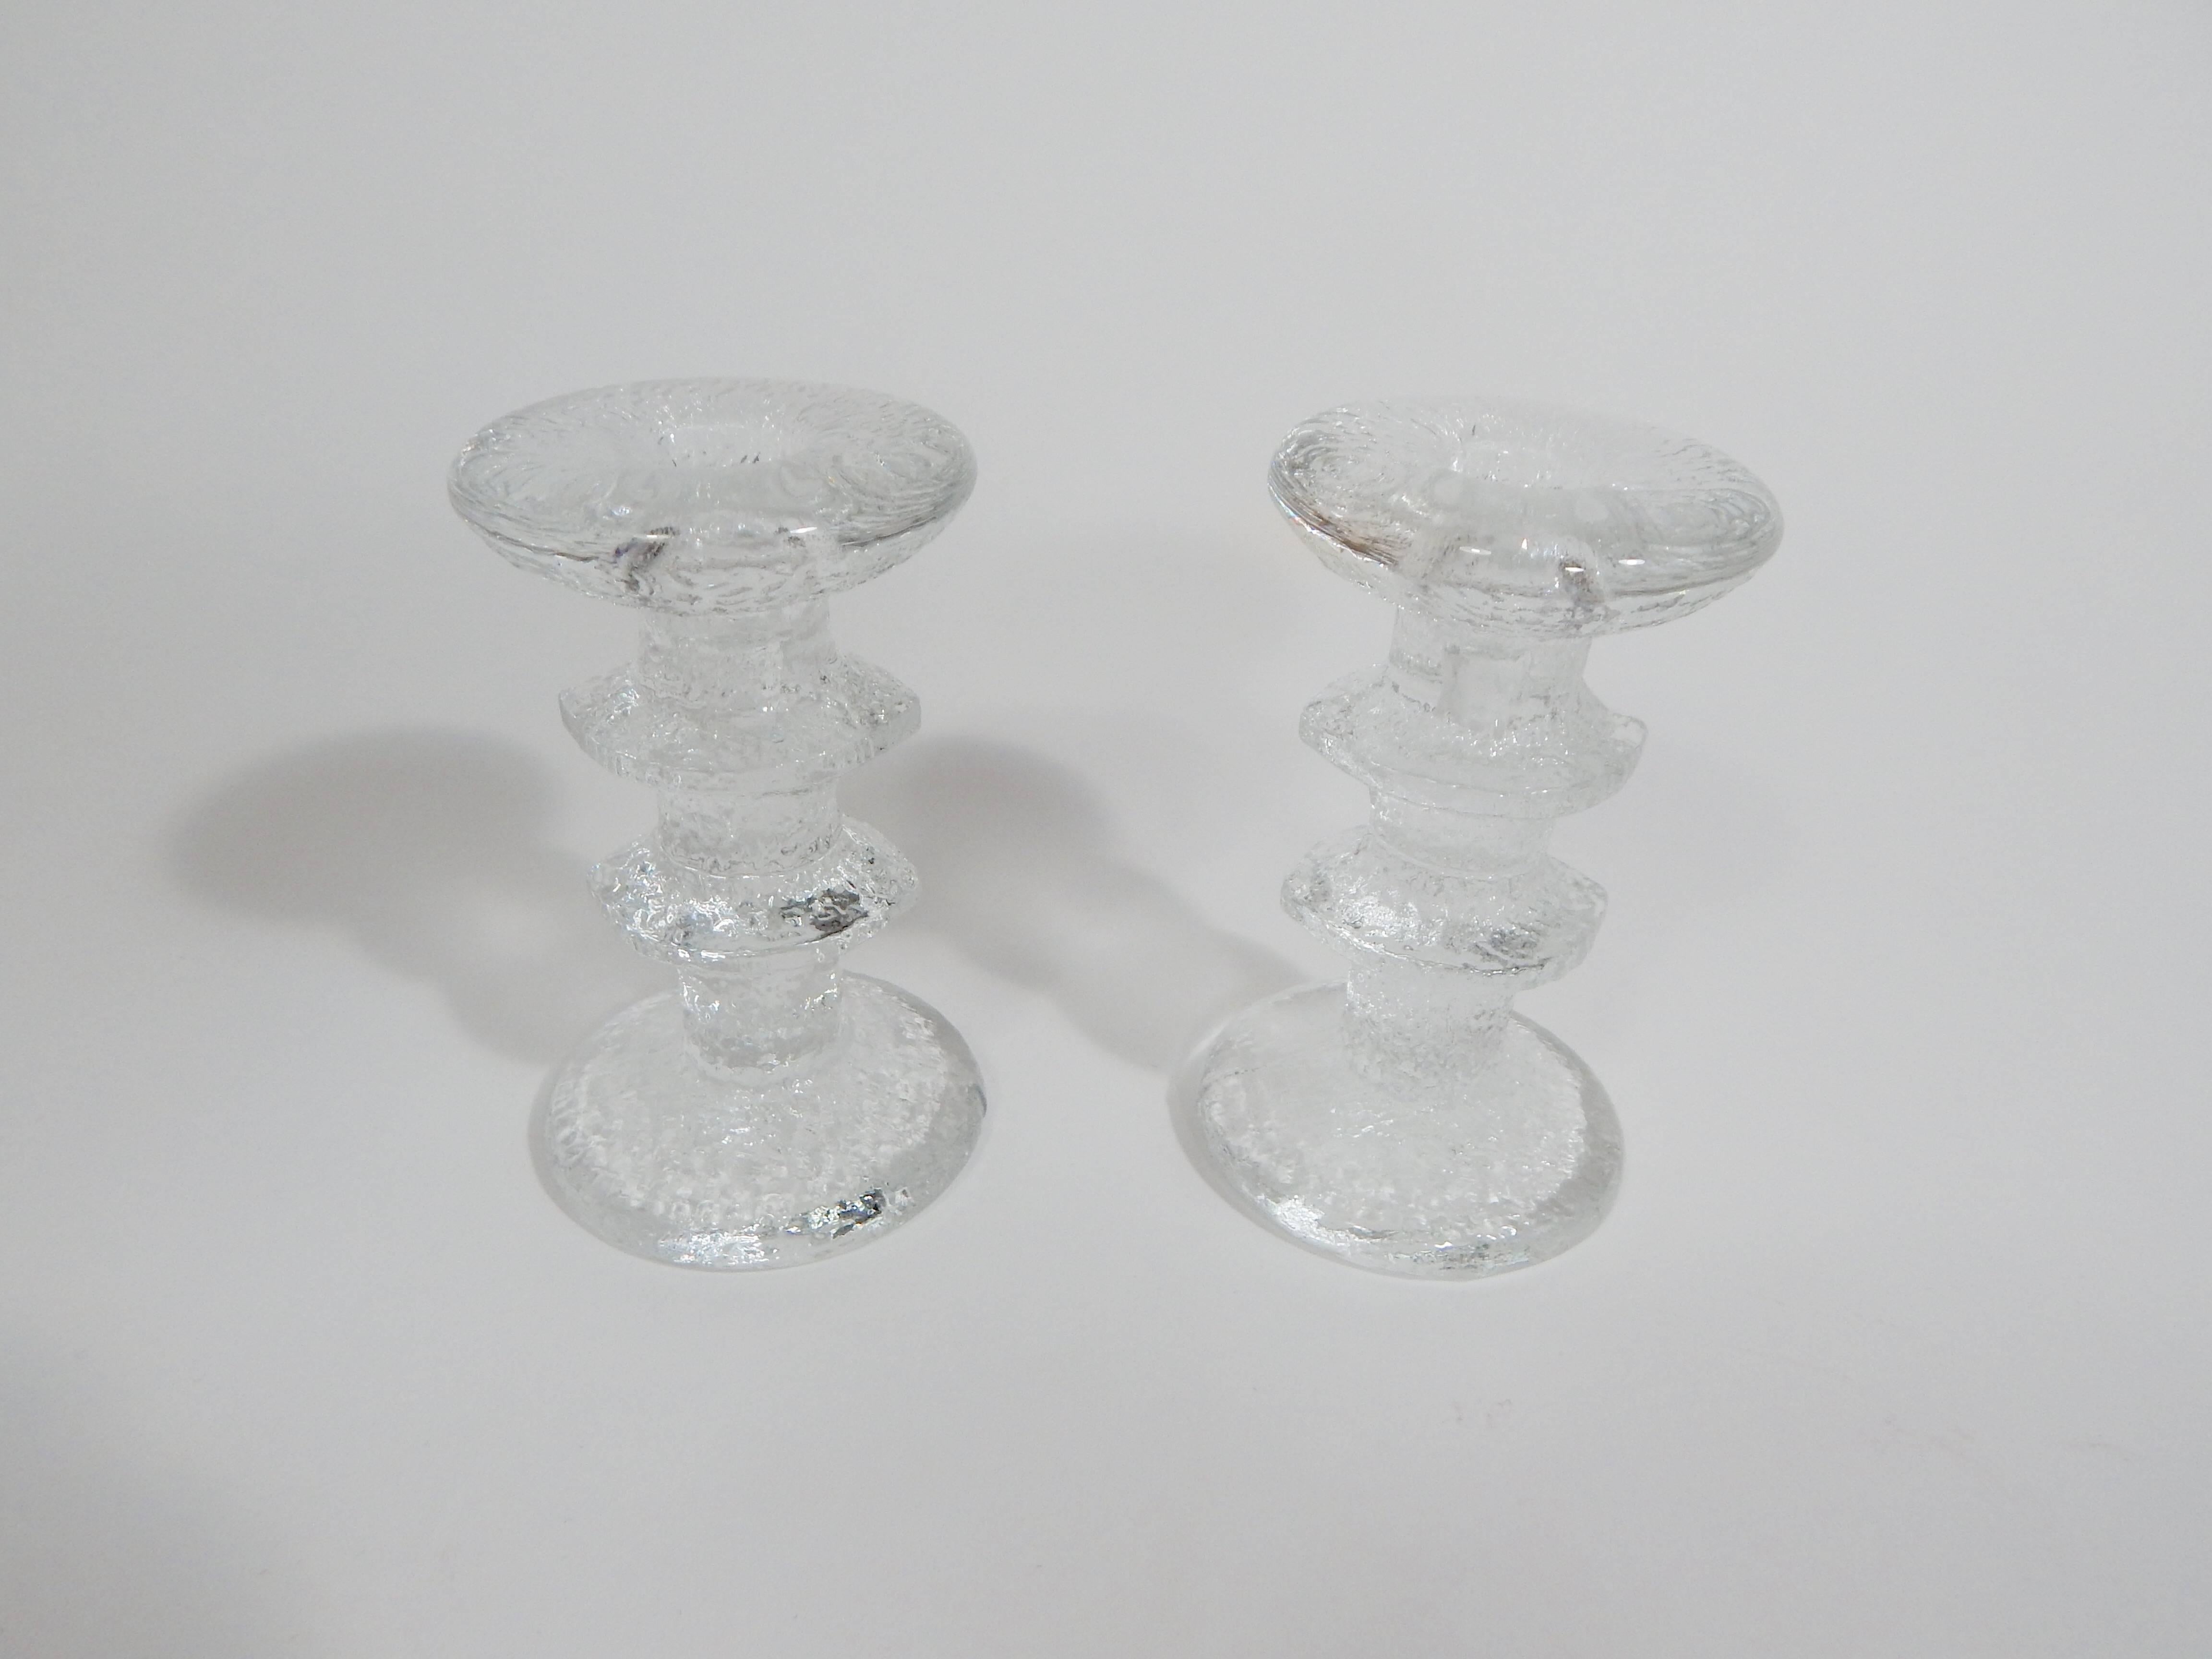 1980s pair of Timo Sarpaneva designed candlesticks, Iittala Finland. 
Excellent condition.
Measures: Height 5 inches.